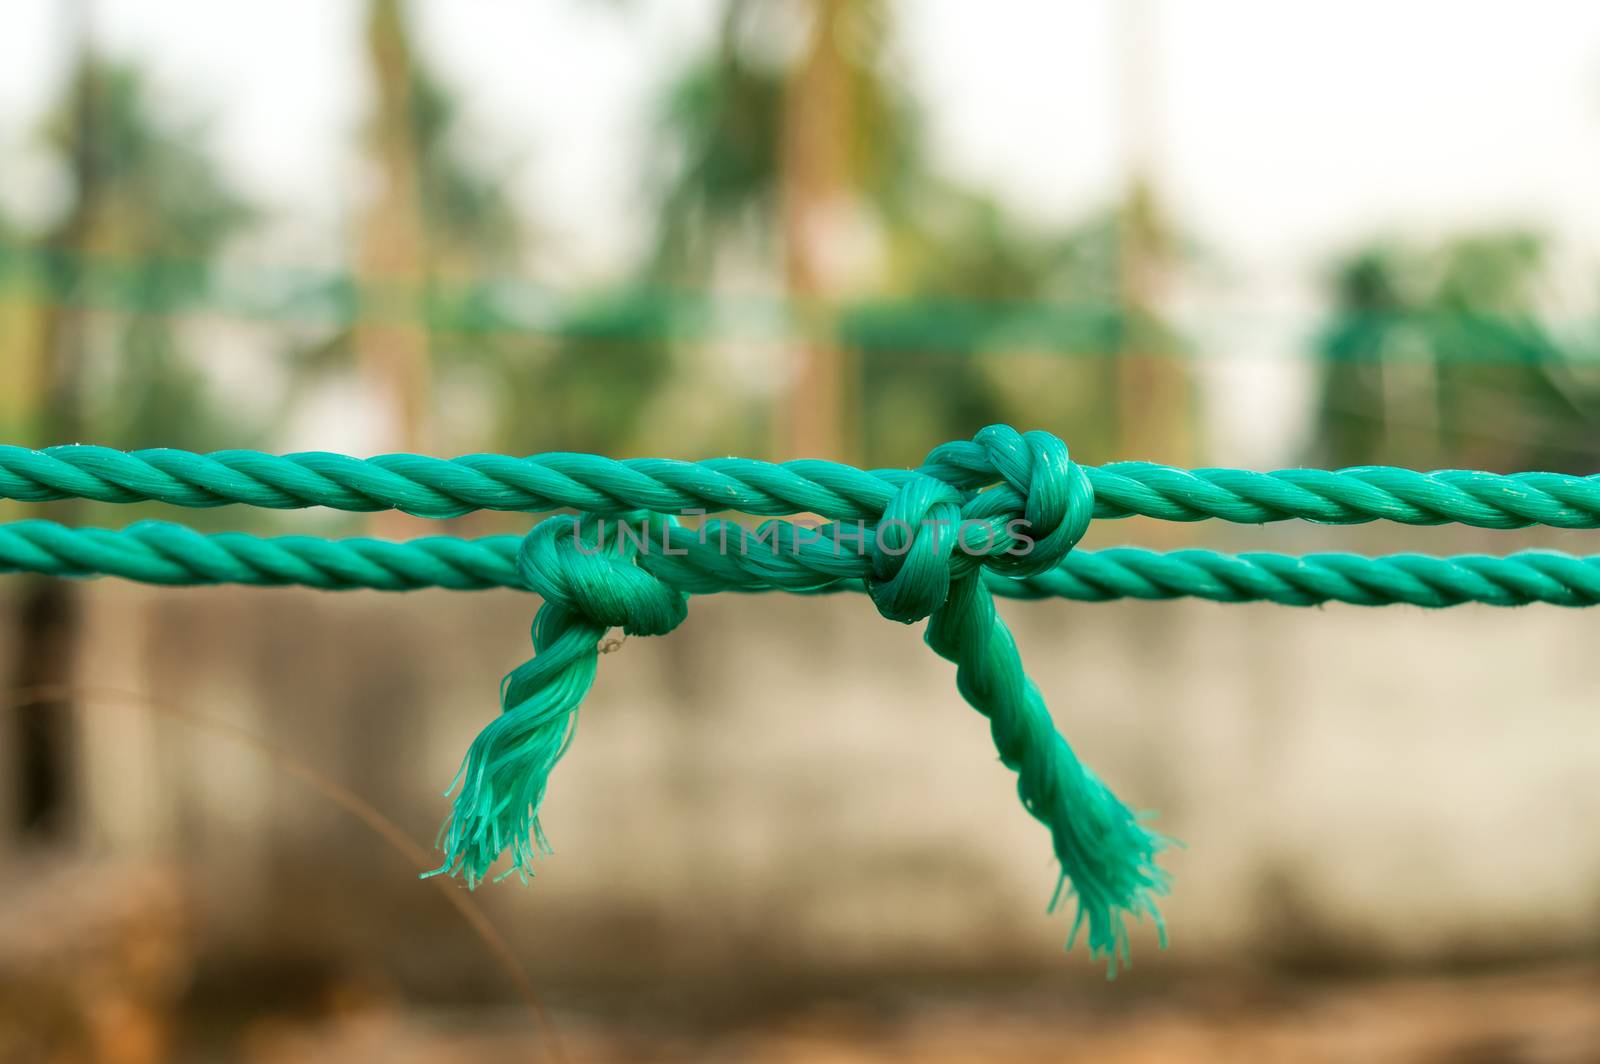 Rope tie knot Closeup. Rope with a two tied knot in the middle isolated from background. A symbol of trust, strength, safety support faith and togetherness concept. Illustrative conceptual photography by sudiptabhowmick